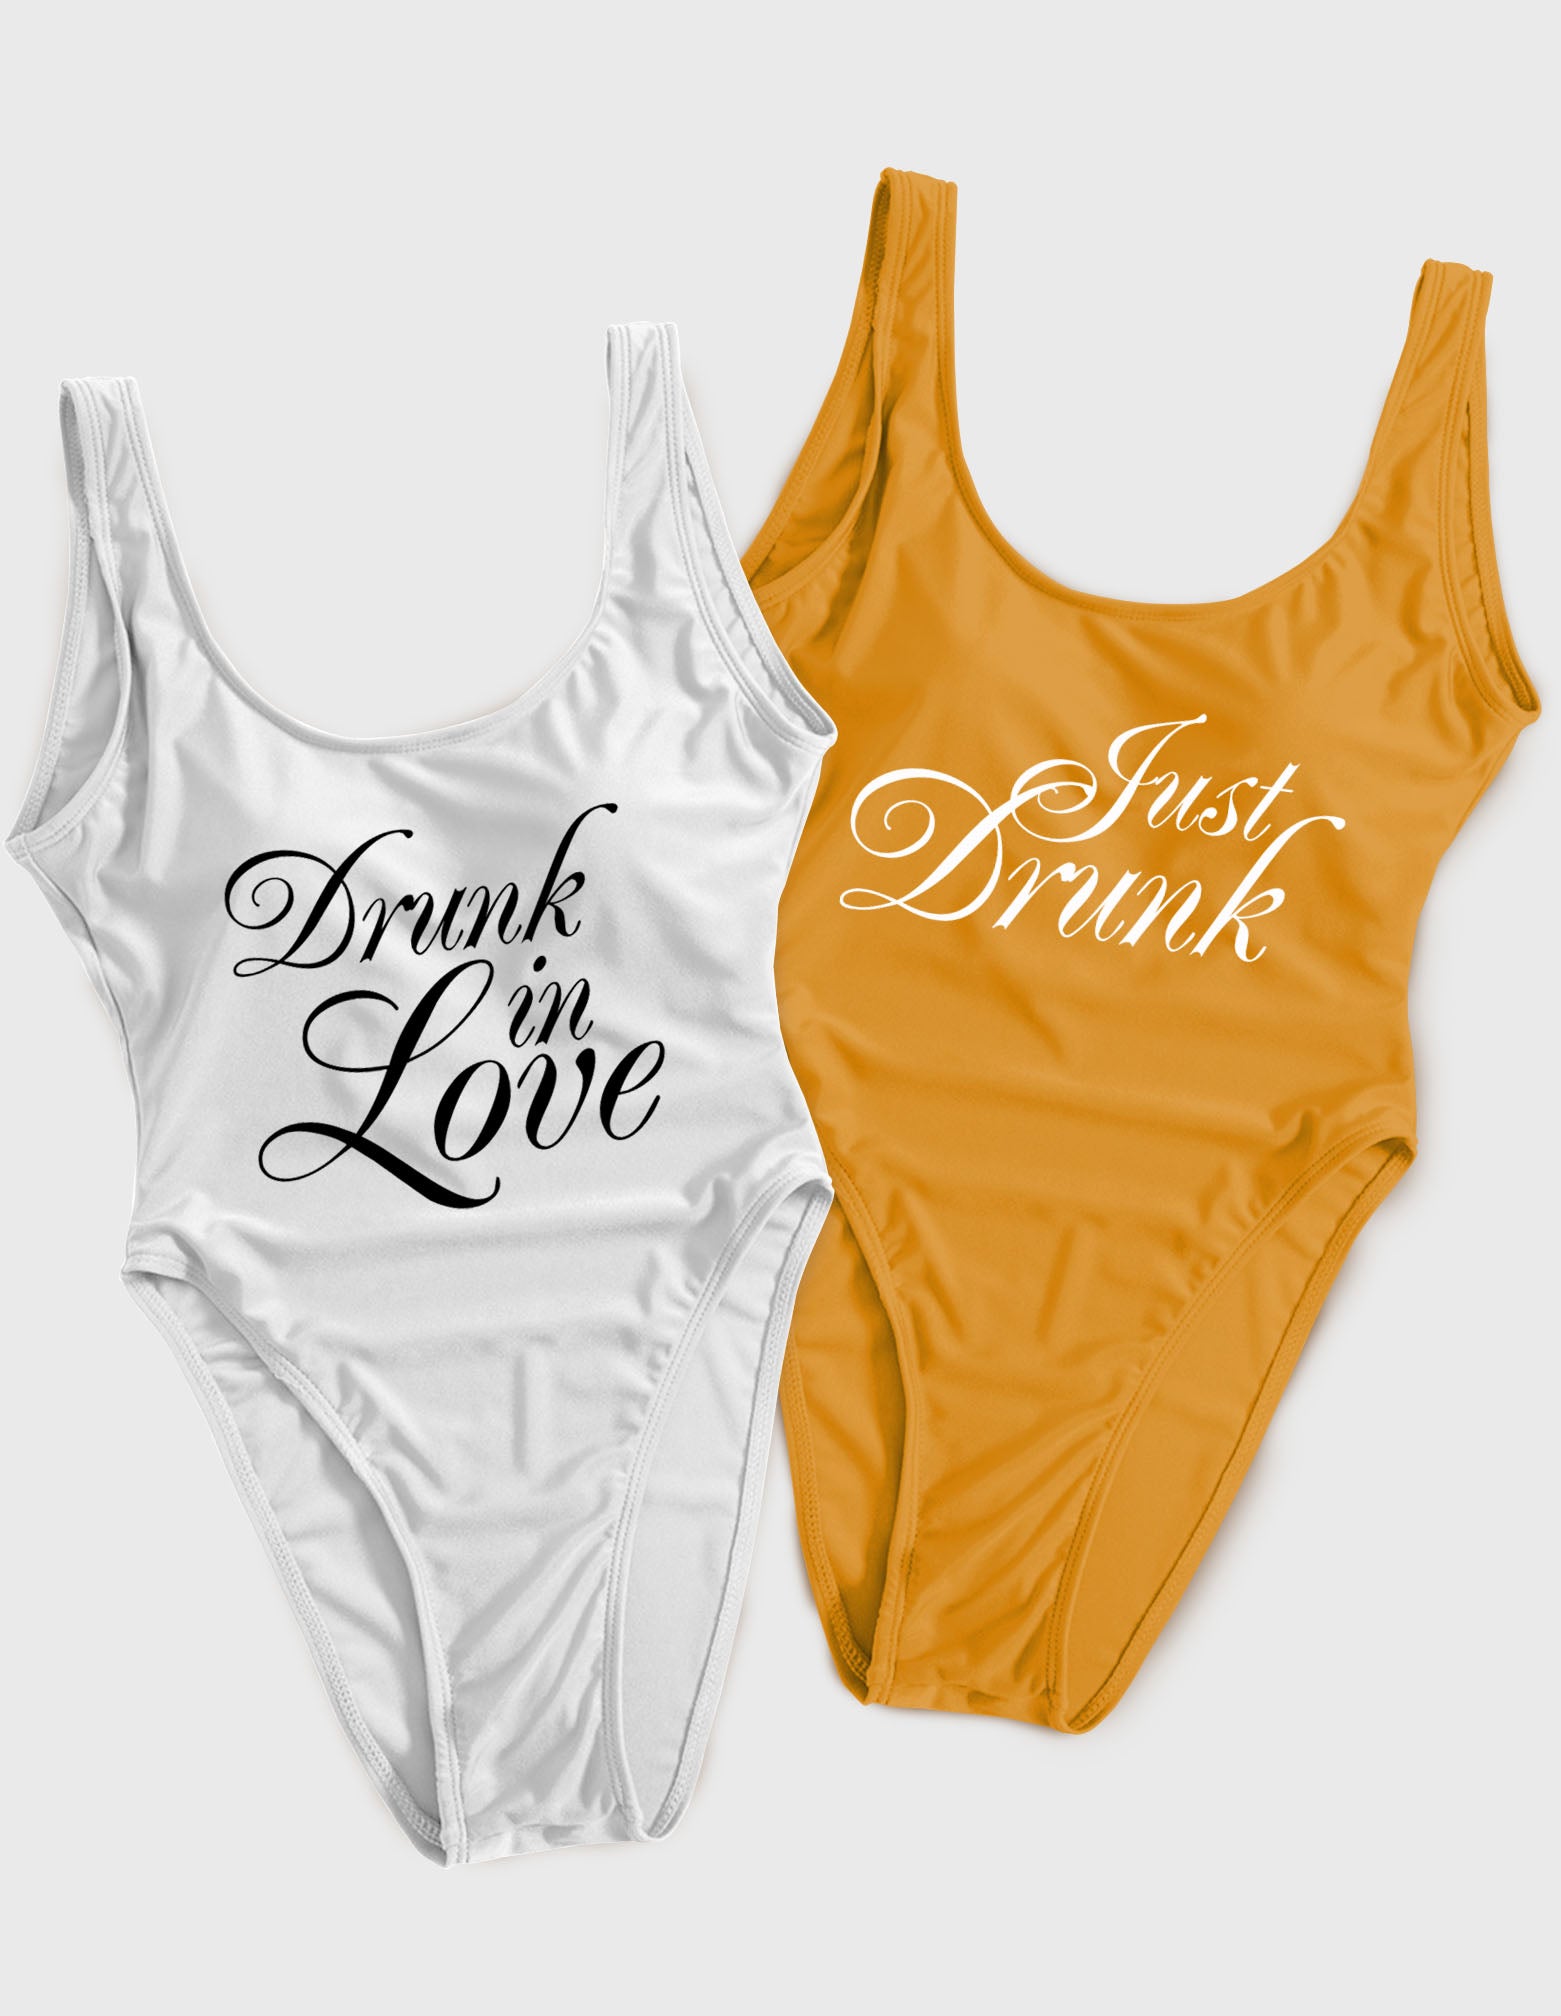 Drunk-in-Love & Just Drunk Style 2 (276, 281) Swimsuit